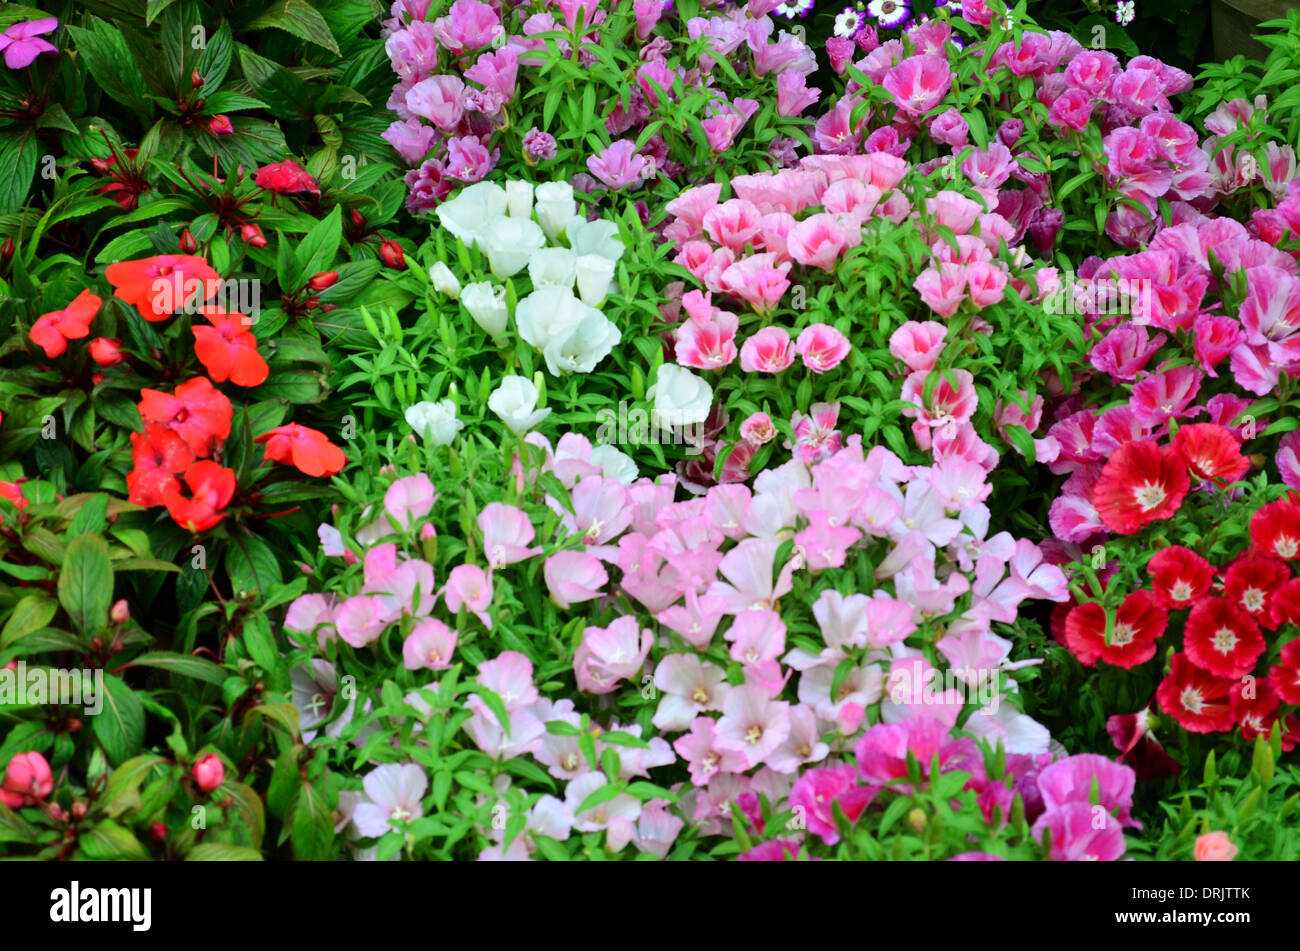 garden full of flowers yellow, red, purple, green leaves Stock Photo